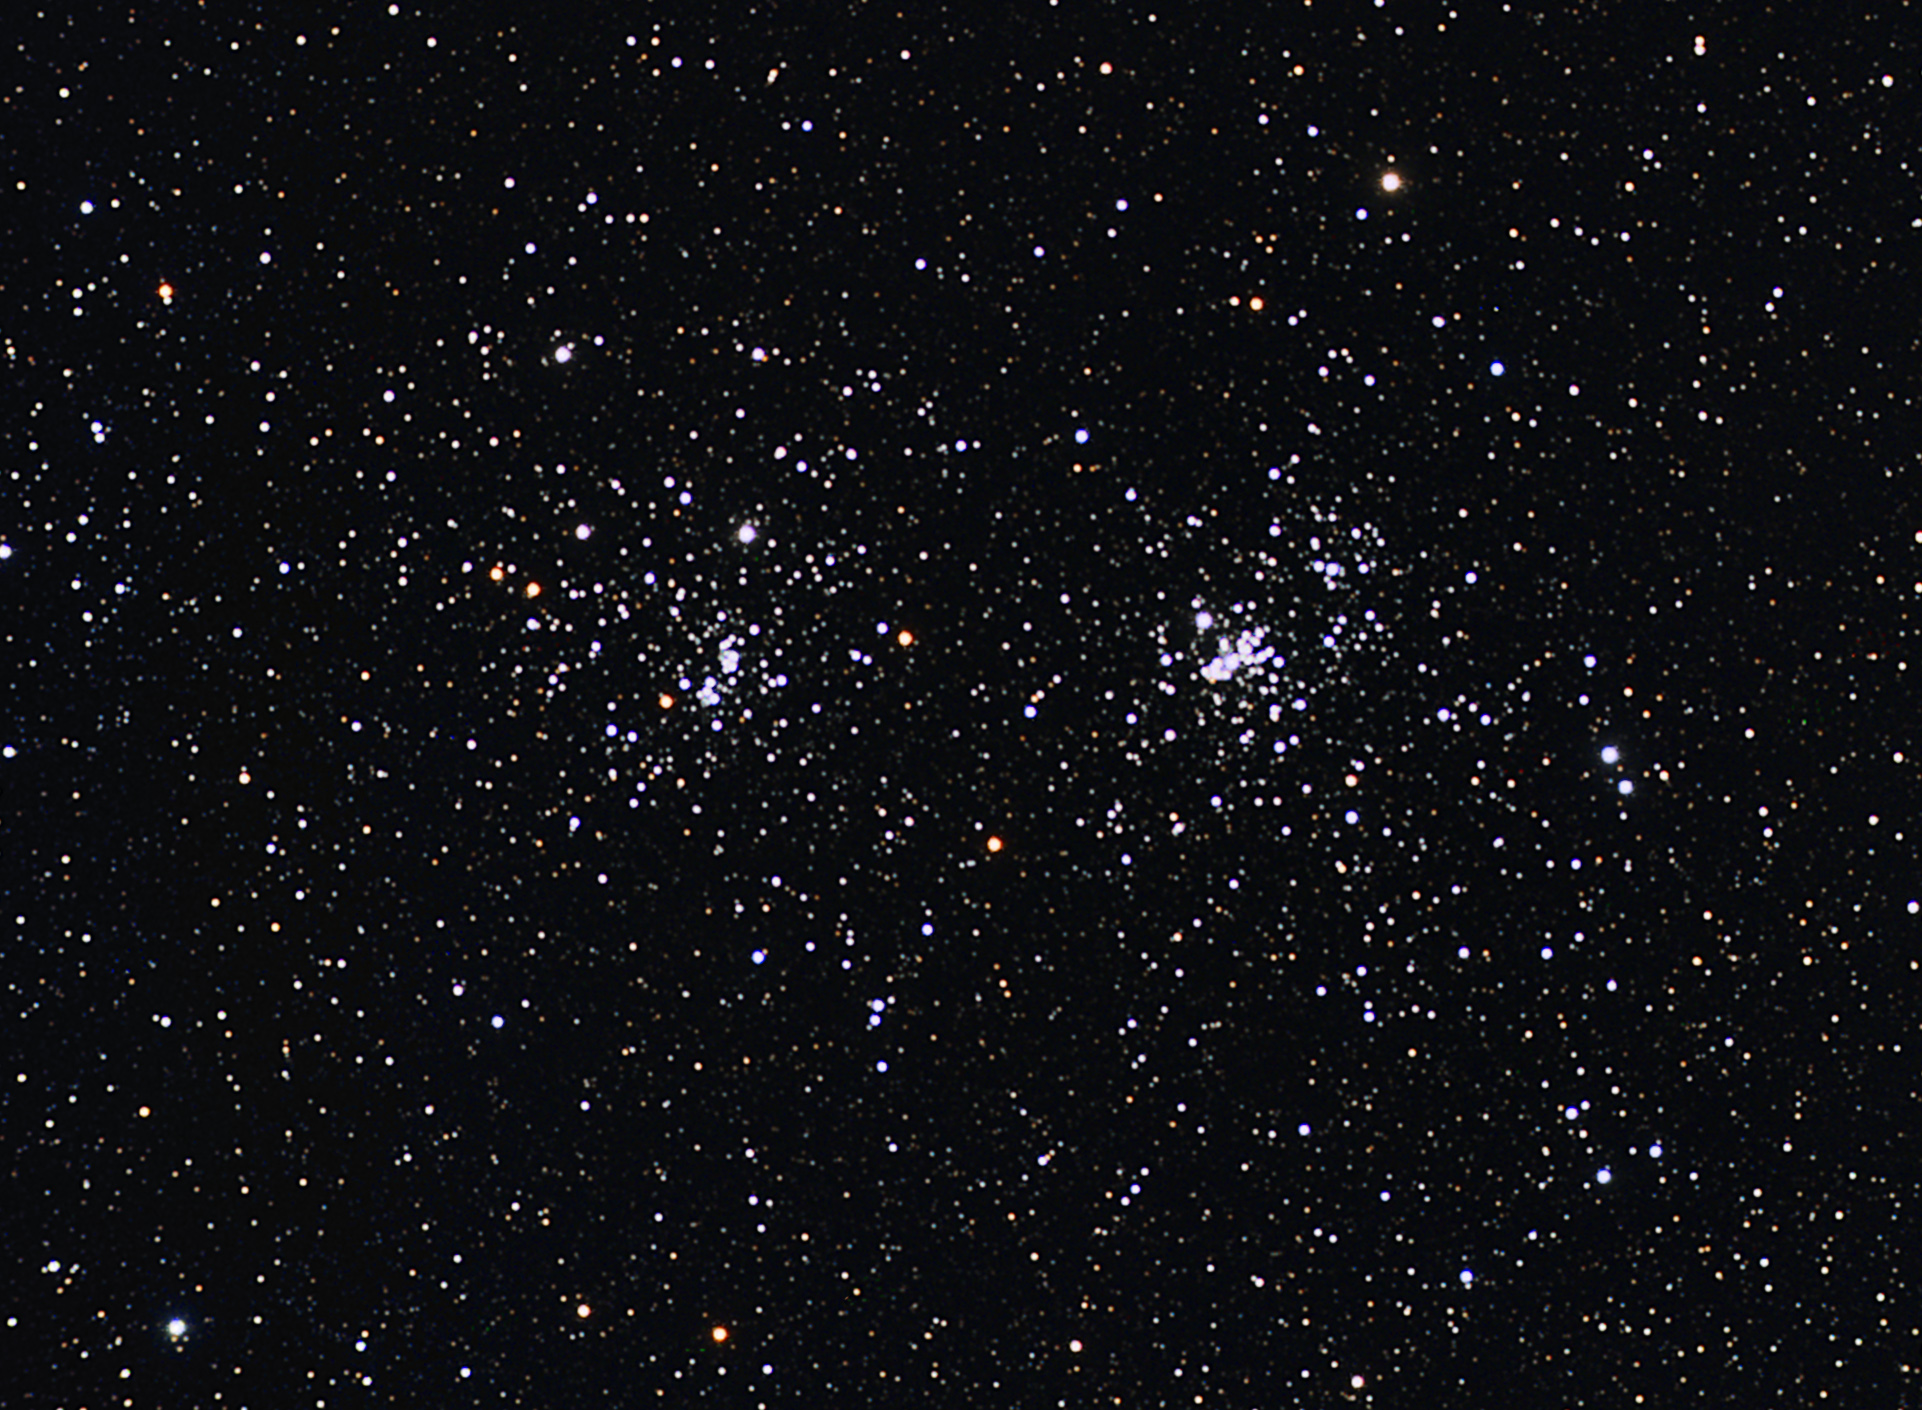 The Double Cluster NGC 869 - 884